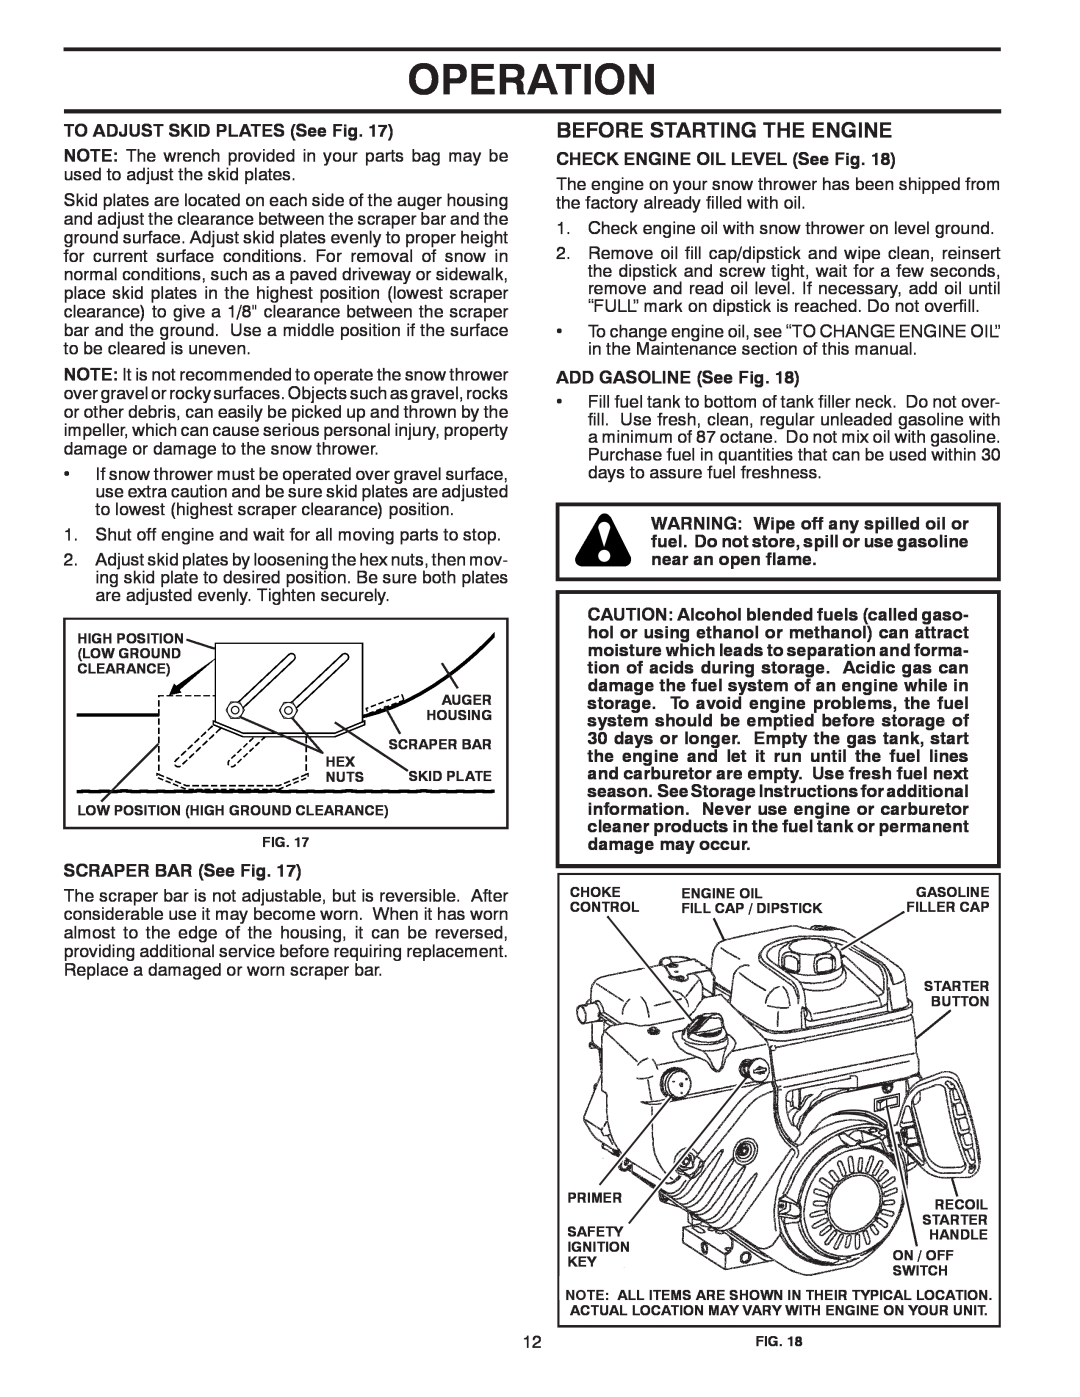 Poulan 438361, 96192004600 Before Starting The Engine, Operation, TO ADJUST SKID PLATES See Fig, SCRAPER BAR See Fig 